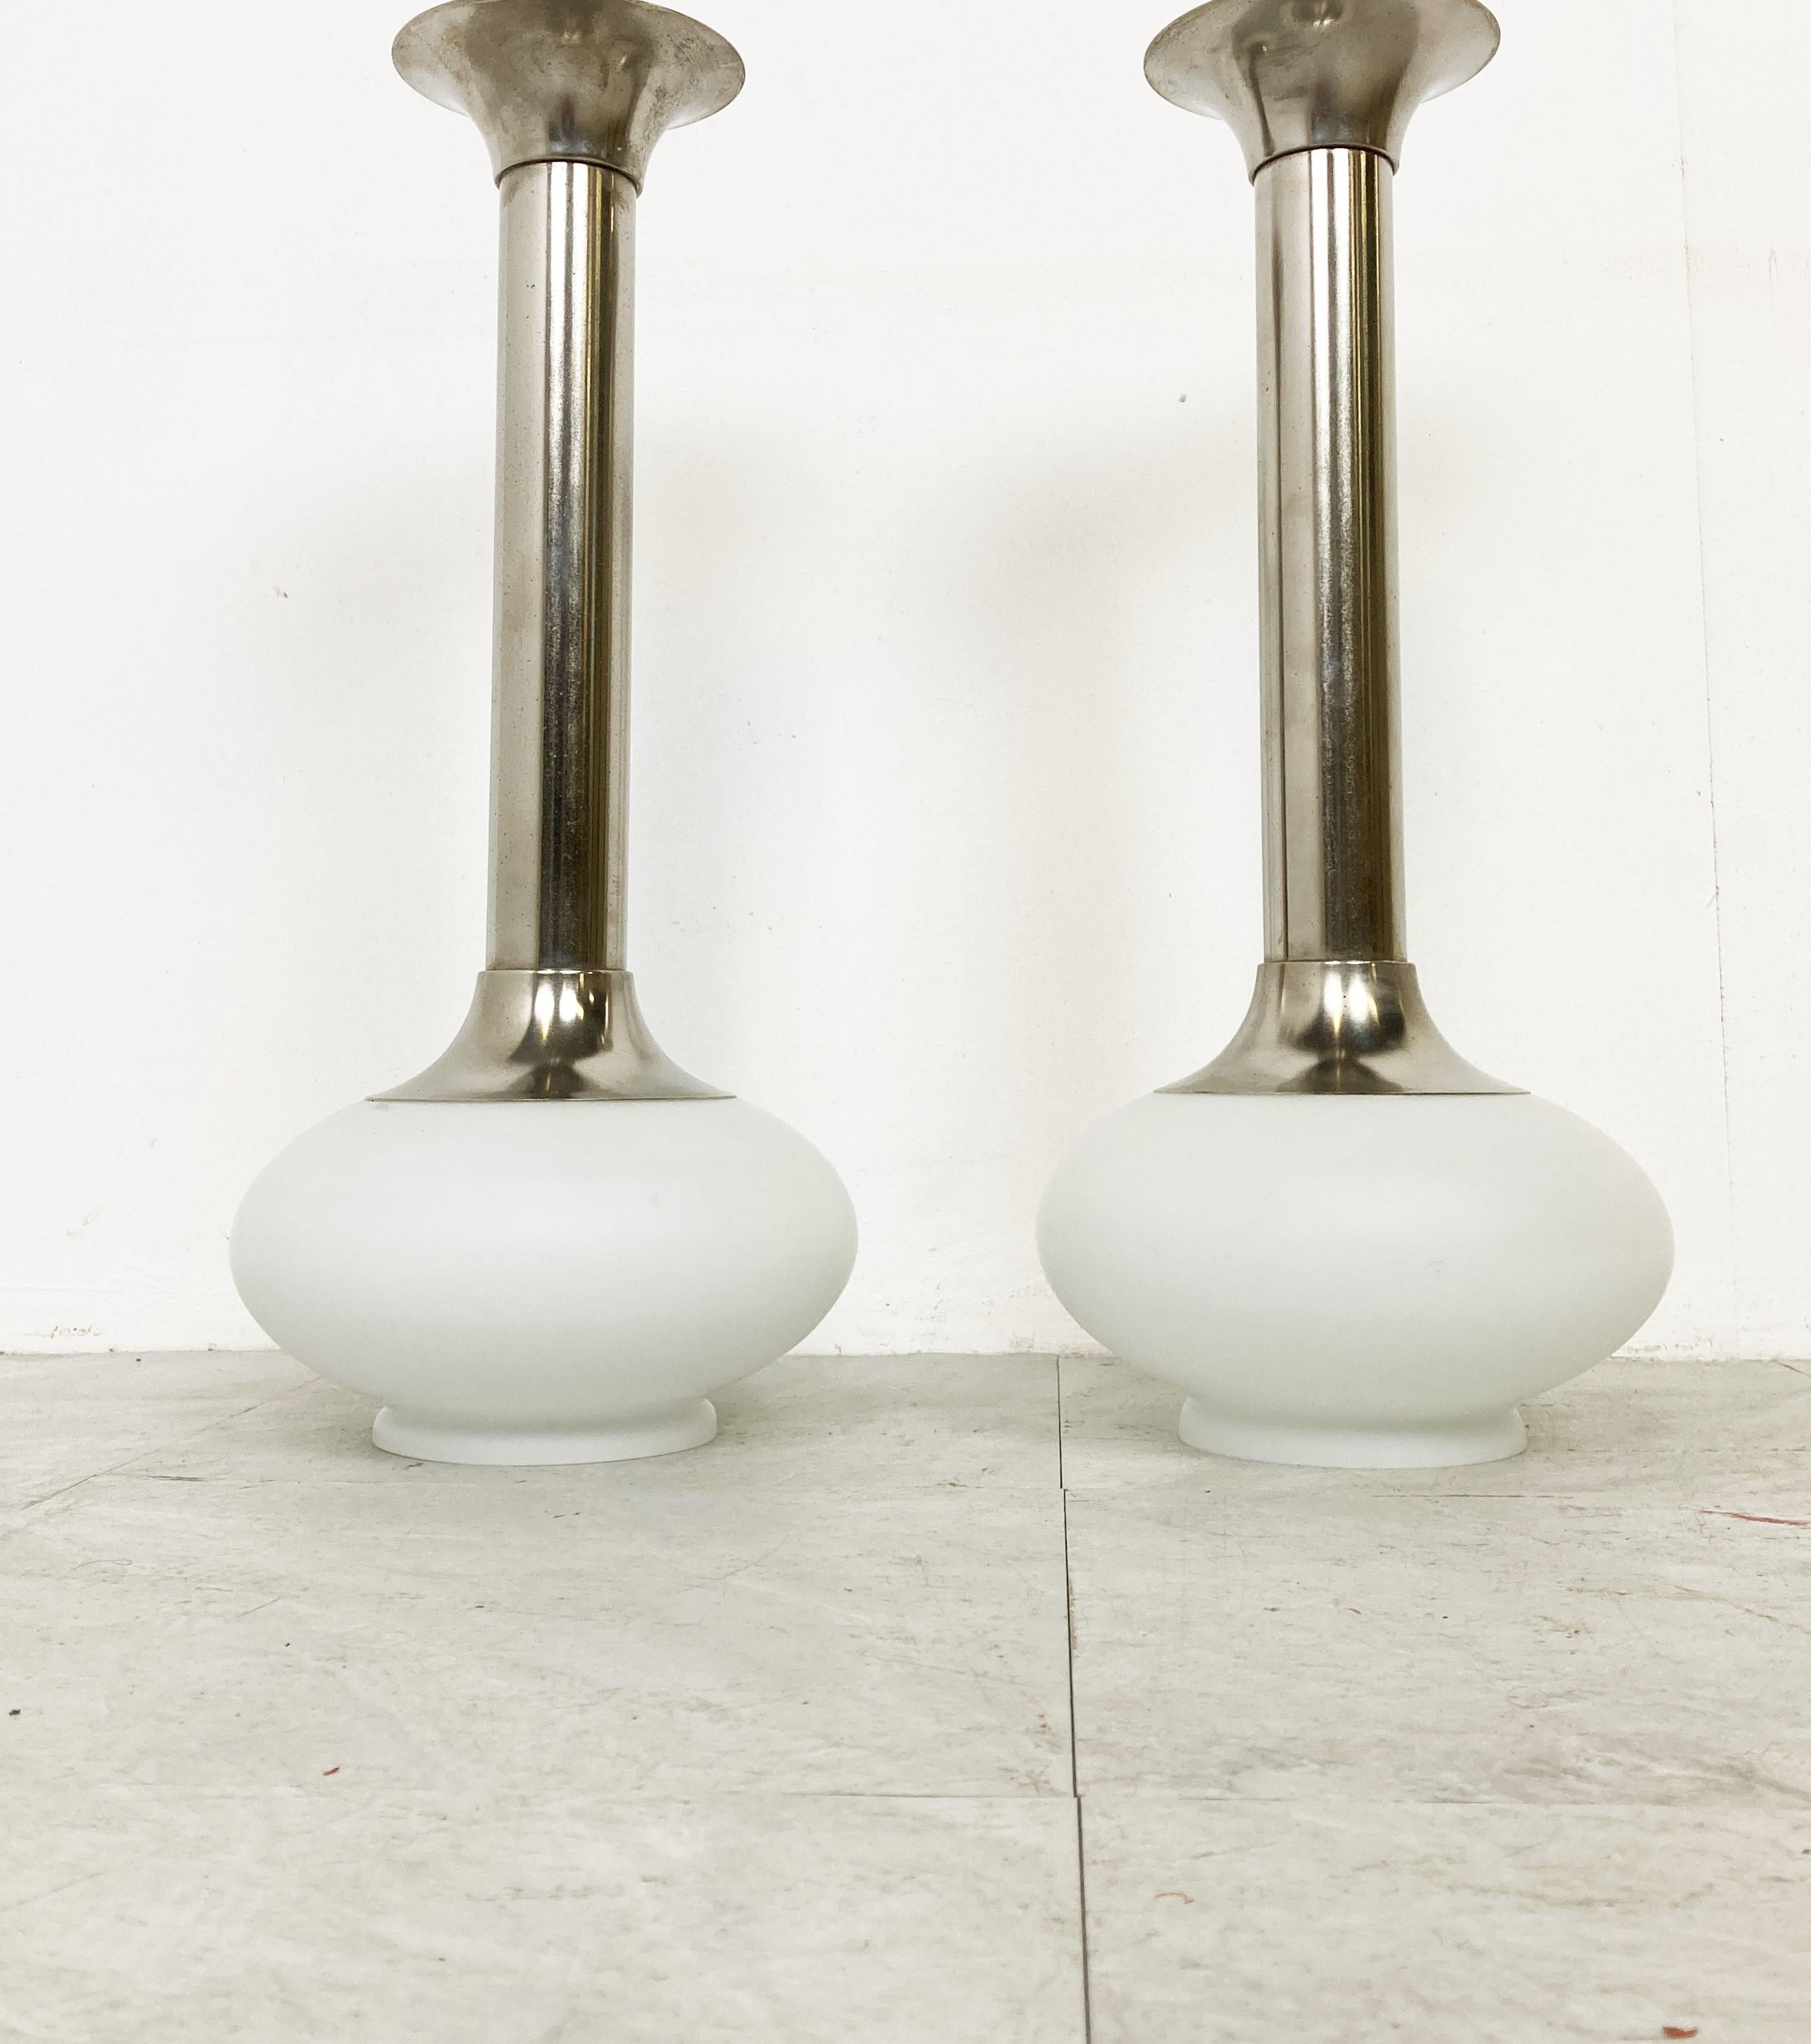 Pair of chromed and opal glass ceiling lights by VEB NARVA from Germany.

Cool space age design with a soft dimmed light thanks to the opal shades.

1970s - Germany

Dimensions:
Height: 51cm/20.07